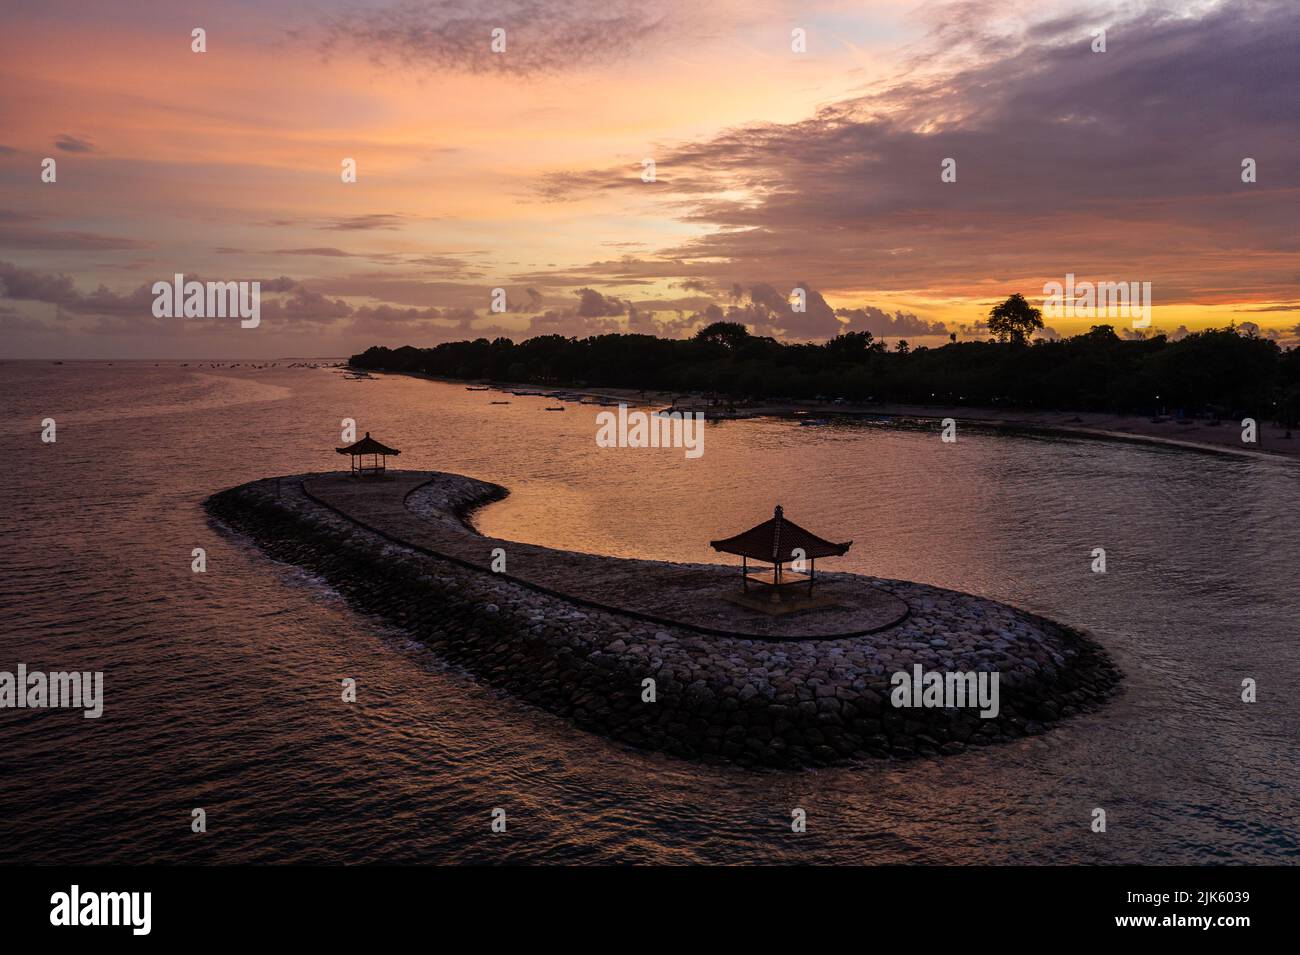 Sanur, Indonesia: Dramatic sunset over the Sanur beach in Bali, famous for its padoga. Stock Photo